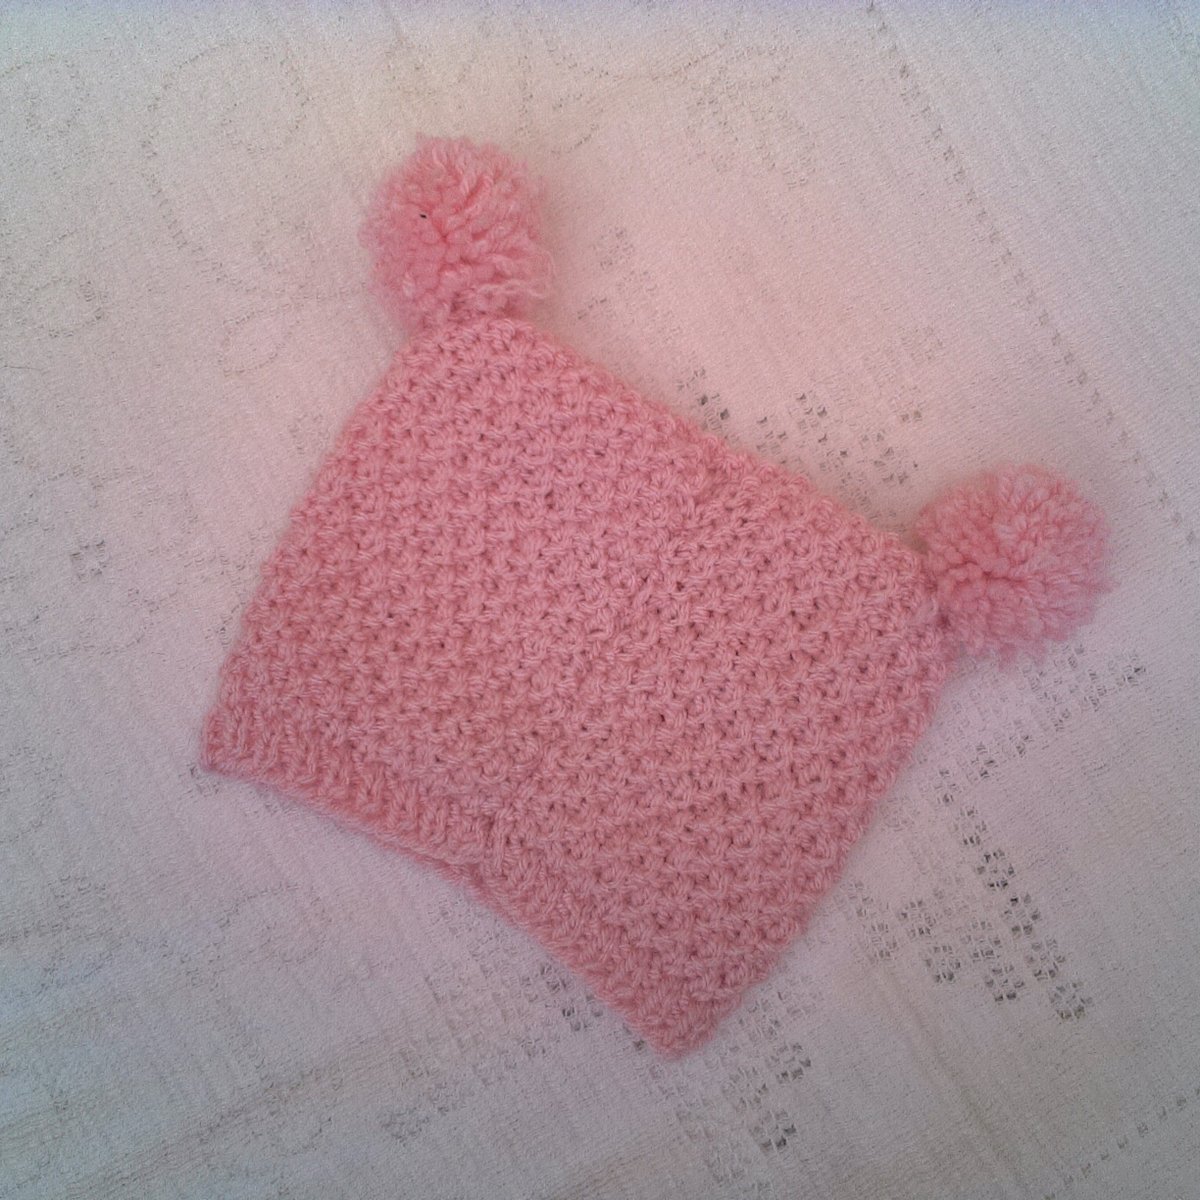 This Unisex Baby's Hand Knitted Hat with Pom Poms can be custom made for you, just tell me the size & colour needed. It would make a lovely gift for a new baby. From £6 + P&P. folksy.com/items/8322550-… #newonfolksy #creationsfortinytots #babyshowergift #babyspompomhat #knittedhat